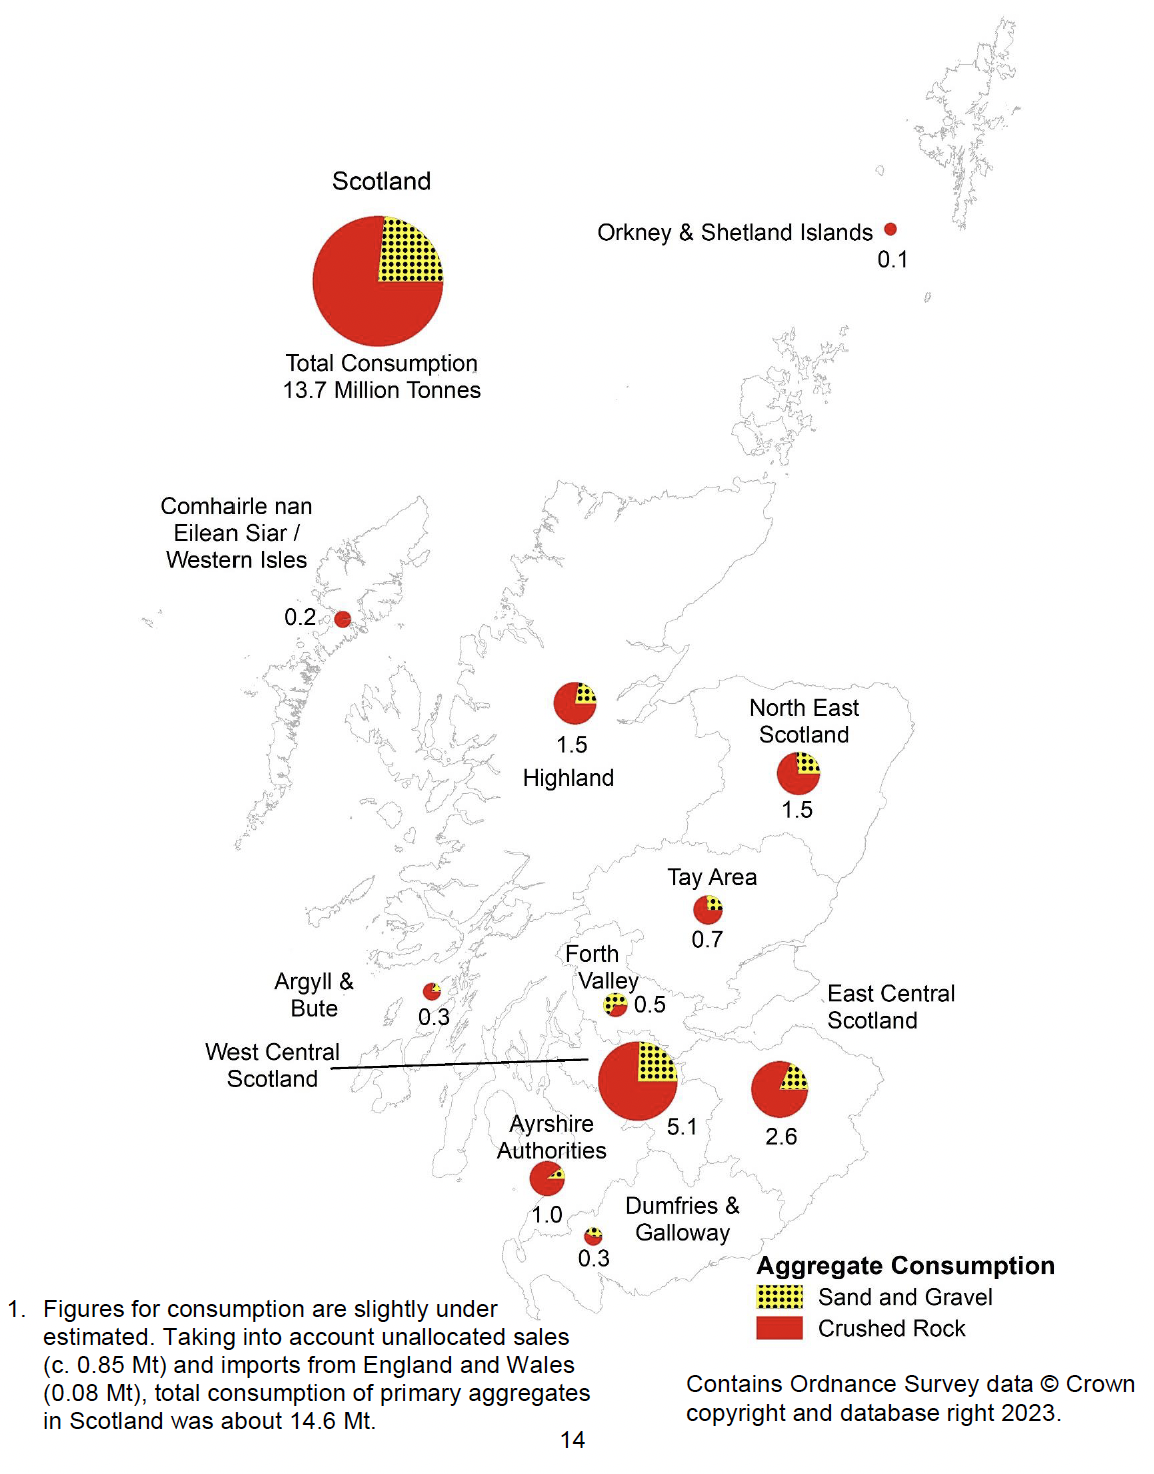 Map showing consumption  of sand and gravel and crushed rock for primary aggregates 2019 by AM2019 survey region 

Total Consumption 13.7 Mt 
Orkney and Shetland 0.1 Mt
Comhairle nan Eilean Siar/ Western Isles 0.2 Mt 
Highland 1.5 Mt 
North East Scotland 1.5 Mt 
Tay Area 0.7 Mt 
East Central Scotland 2.6 Mt 
Dumfries and Galloway 0.3 Mt 
Ayrshire Authorities 1 Mt 
West Central Scotland 5.1 Mt 
Forth Valley 0.5 Mt 
Argyll and Bute 0.3 Mt 